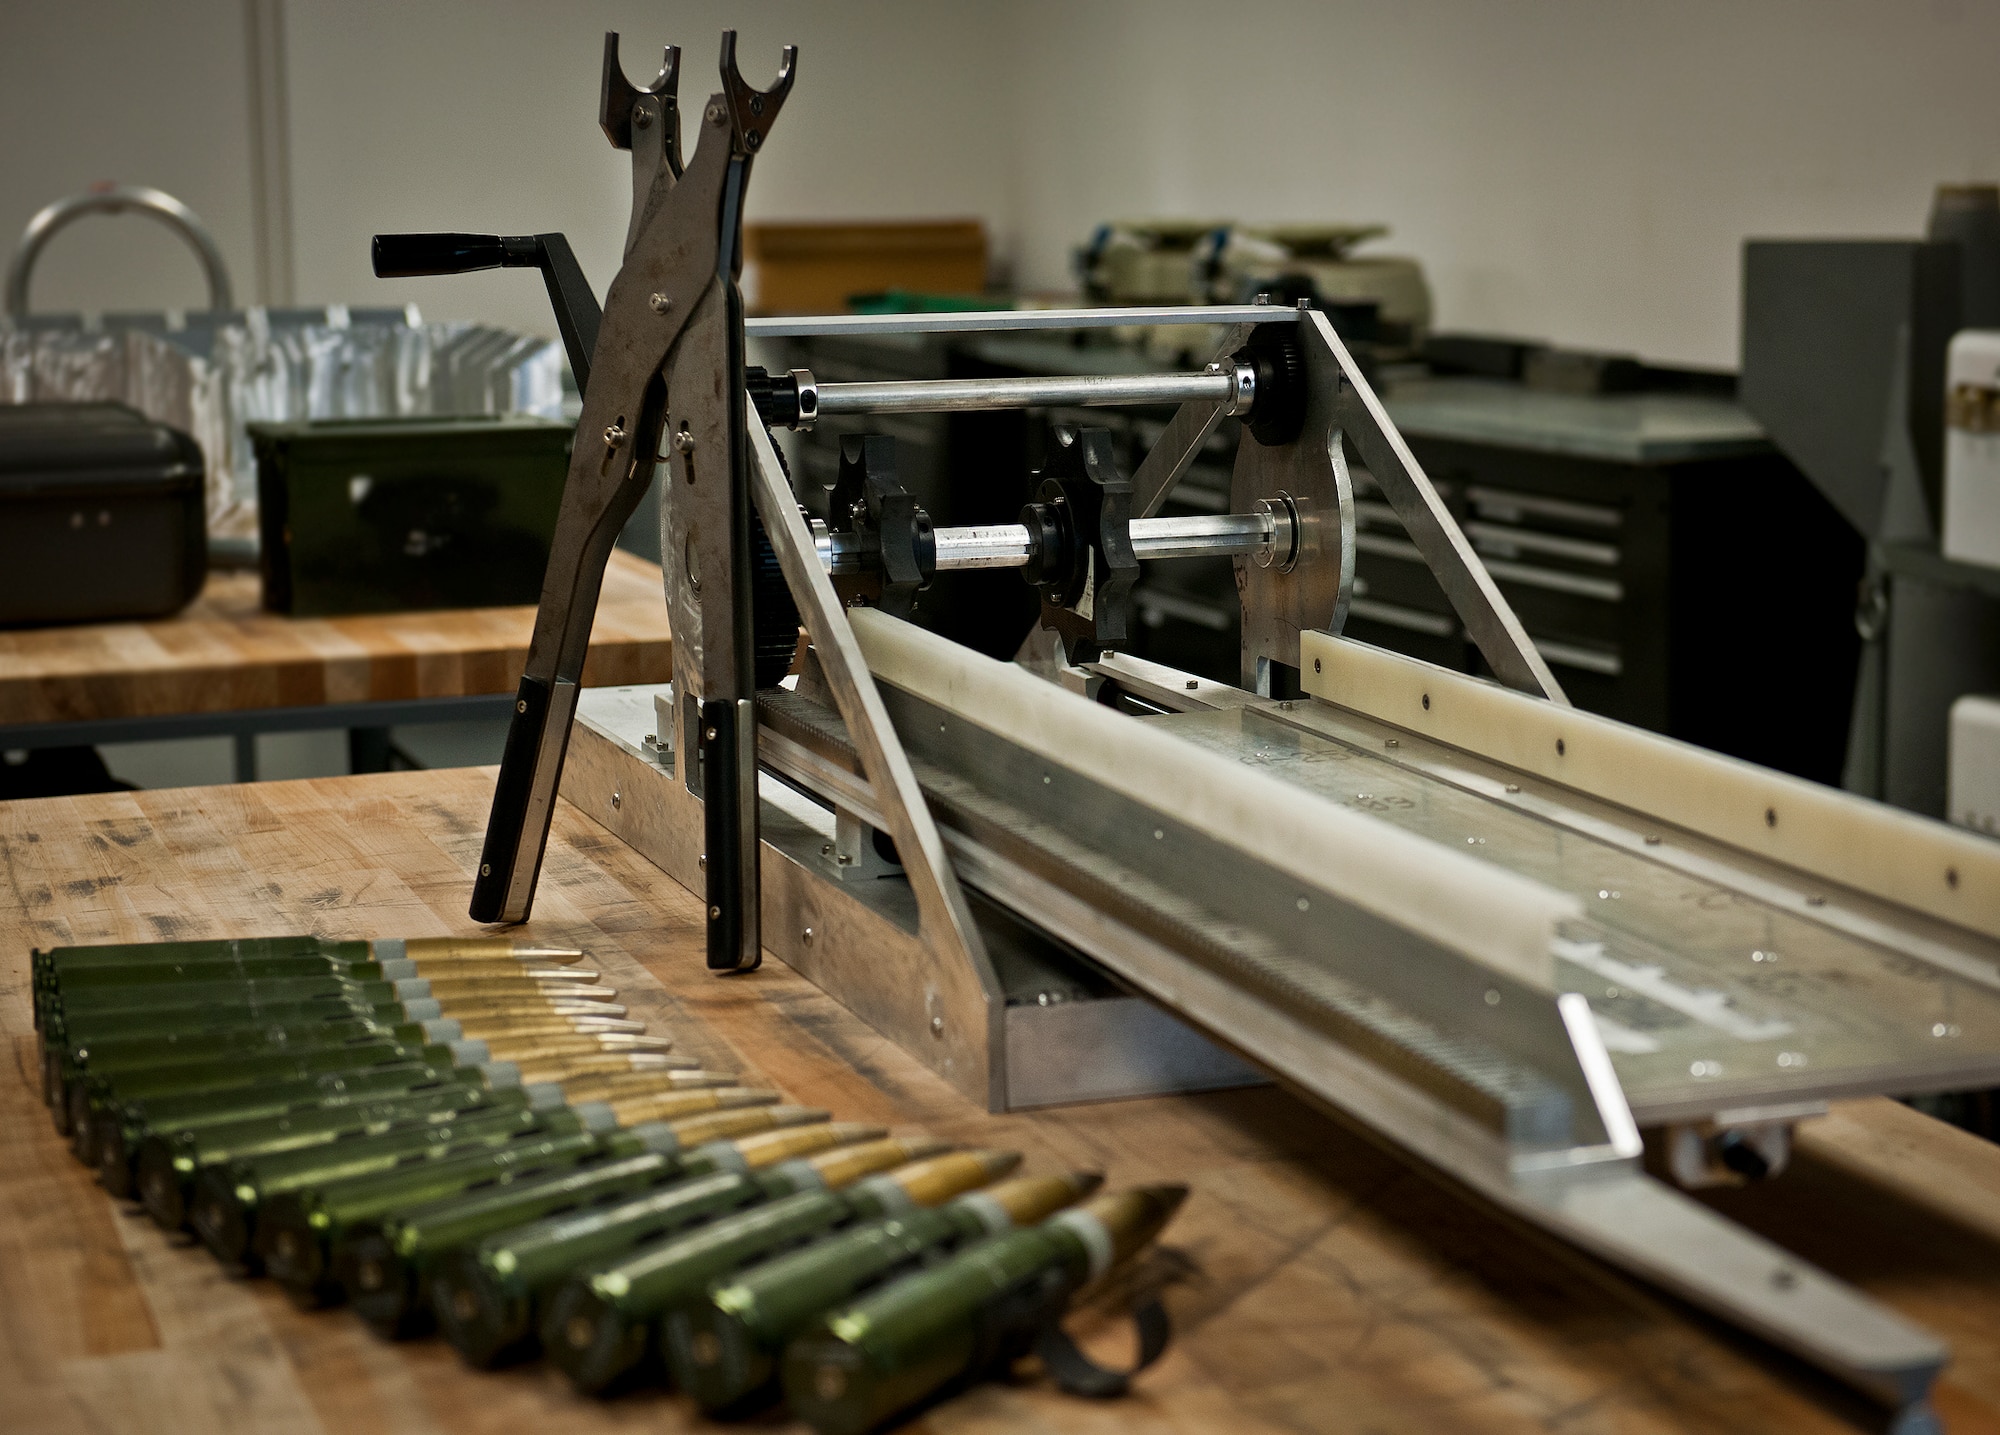 The lightweight, mobile 30mm ammunition round linker and de-linker sit ready for delivery to Air Force Special Operations Command. The linker connects rounds to MK-15 links using a hand crank or a conventional electric drill.  The de-linker (similar to a large set of plyers) disconnects the rounds safely and easily from the MK-15 links. Both products were created by the Munitions Materiel Handling Equipment Focal Point, a section under the Air Force Life Cycle Management Center’s Armament Directorate, specializing in developing locally manufactured equipment for the Air Force ammo and weapons communities.  The new linker is one-tenth the weight and cost of the current ammo linker in use and will be delivered in May.  (U.S. Air Force photo/Samuel King Jr.)